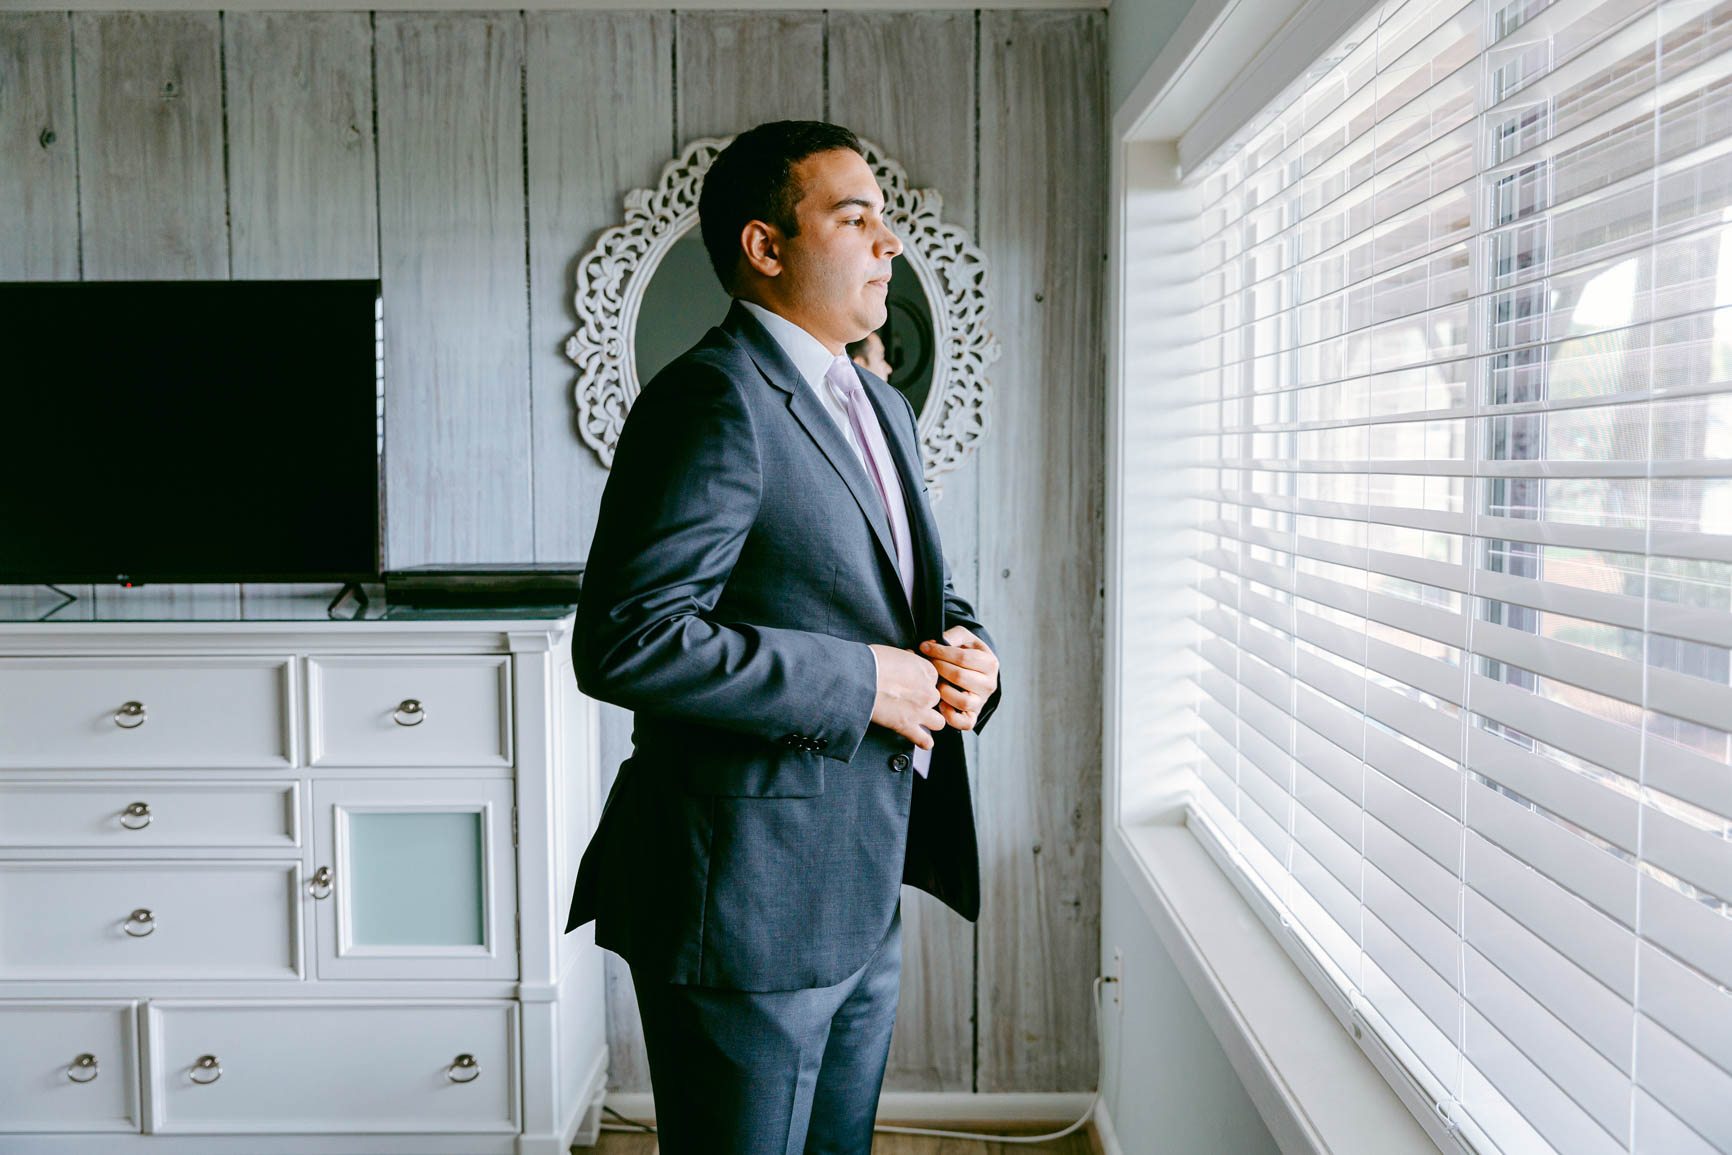 groom button up suit at a lake house elopement shot by Nhieu Tang Photography | nhieutang.com